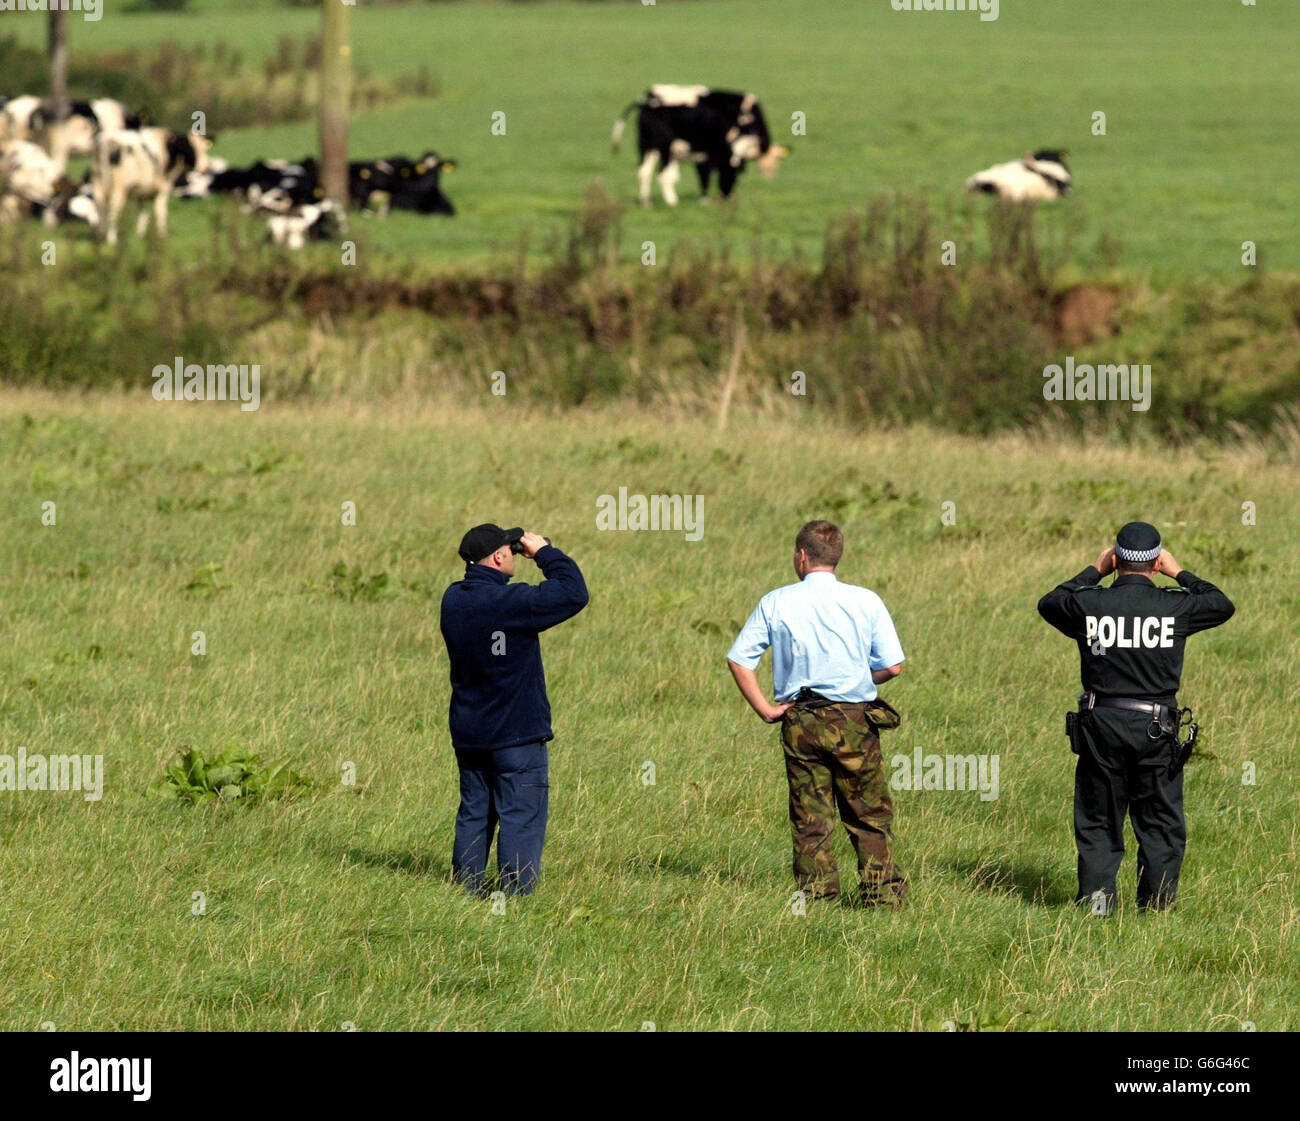 Police search fields in North Antrim, Belfast, following sightings of a big cat. The search follows more than 20 sightings of a wild animal, thought to be a puma, in the area since August. A helicopter and police air support unit is also involved in a dawn till dusk operation to try to catch or kill the animal. Stock Photo